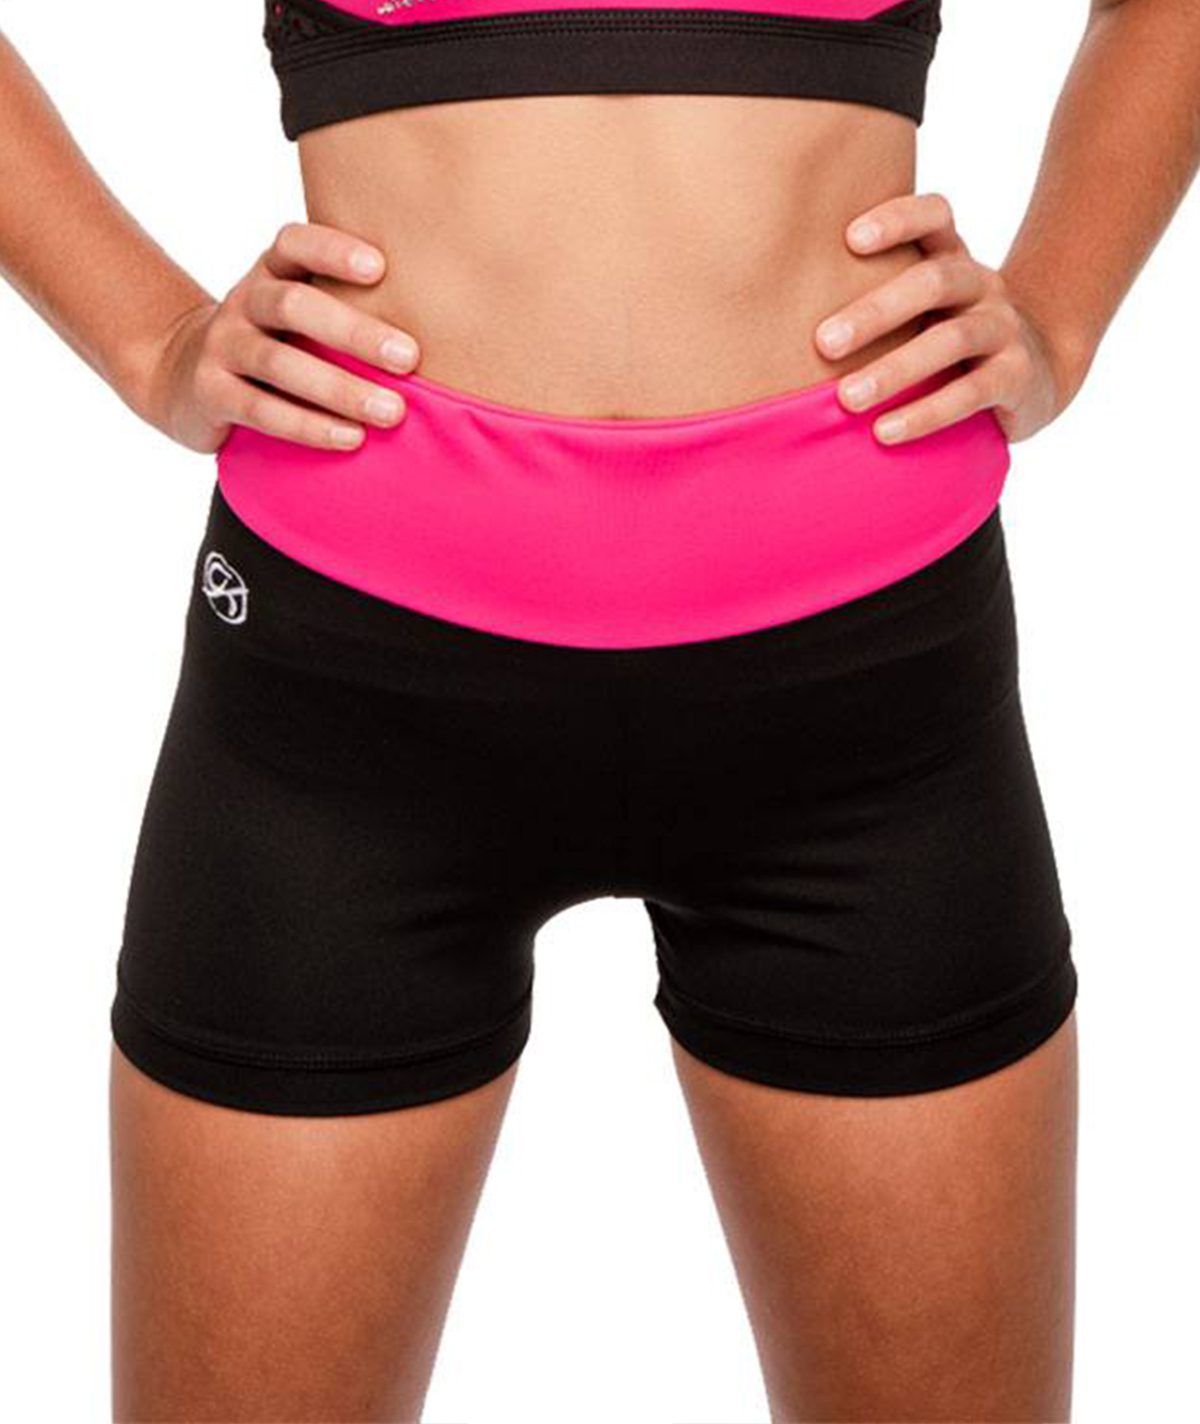 GK All Star Black High Waisted Cheer Shorts with Colorblock Waistband